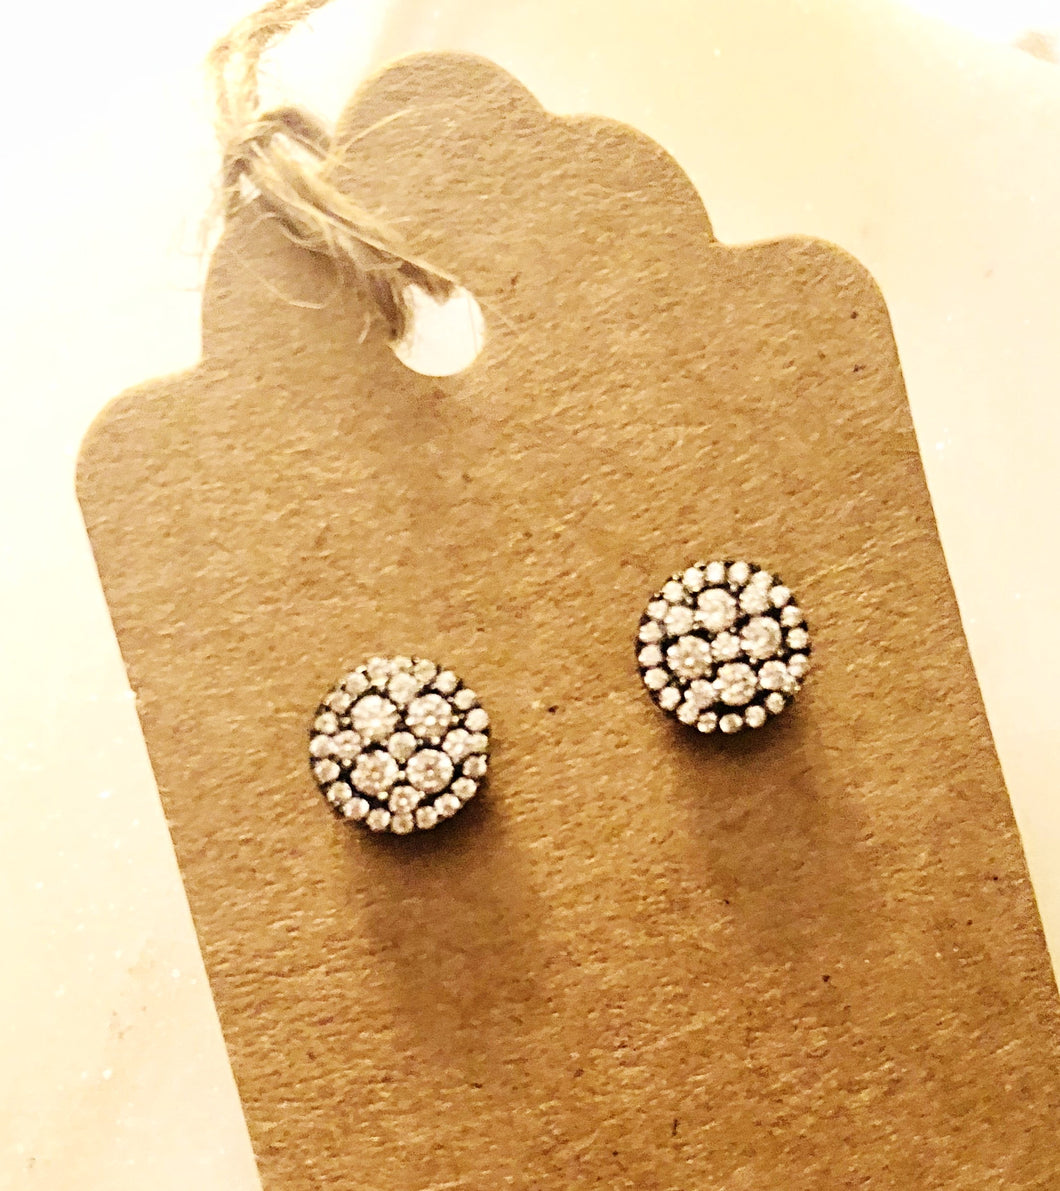 925 Sterling Silver/Black Ruthenium pave circle earrings. Edgy yet timeless just like you.